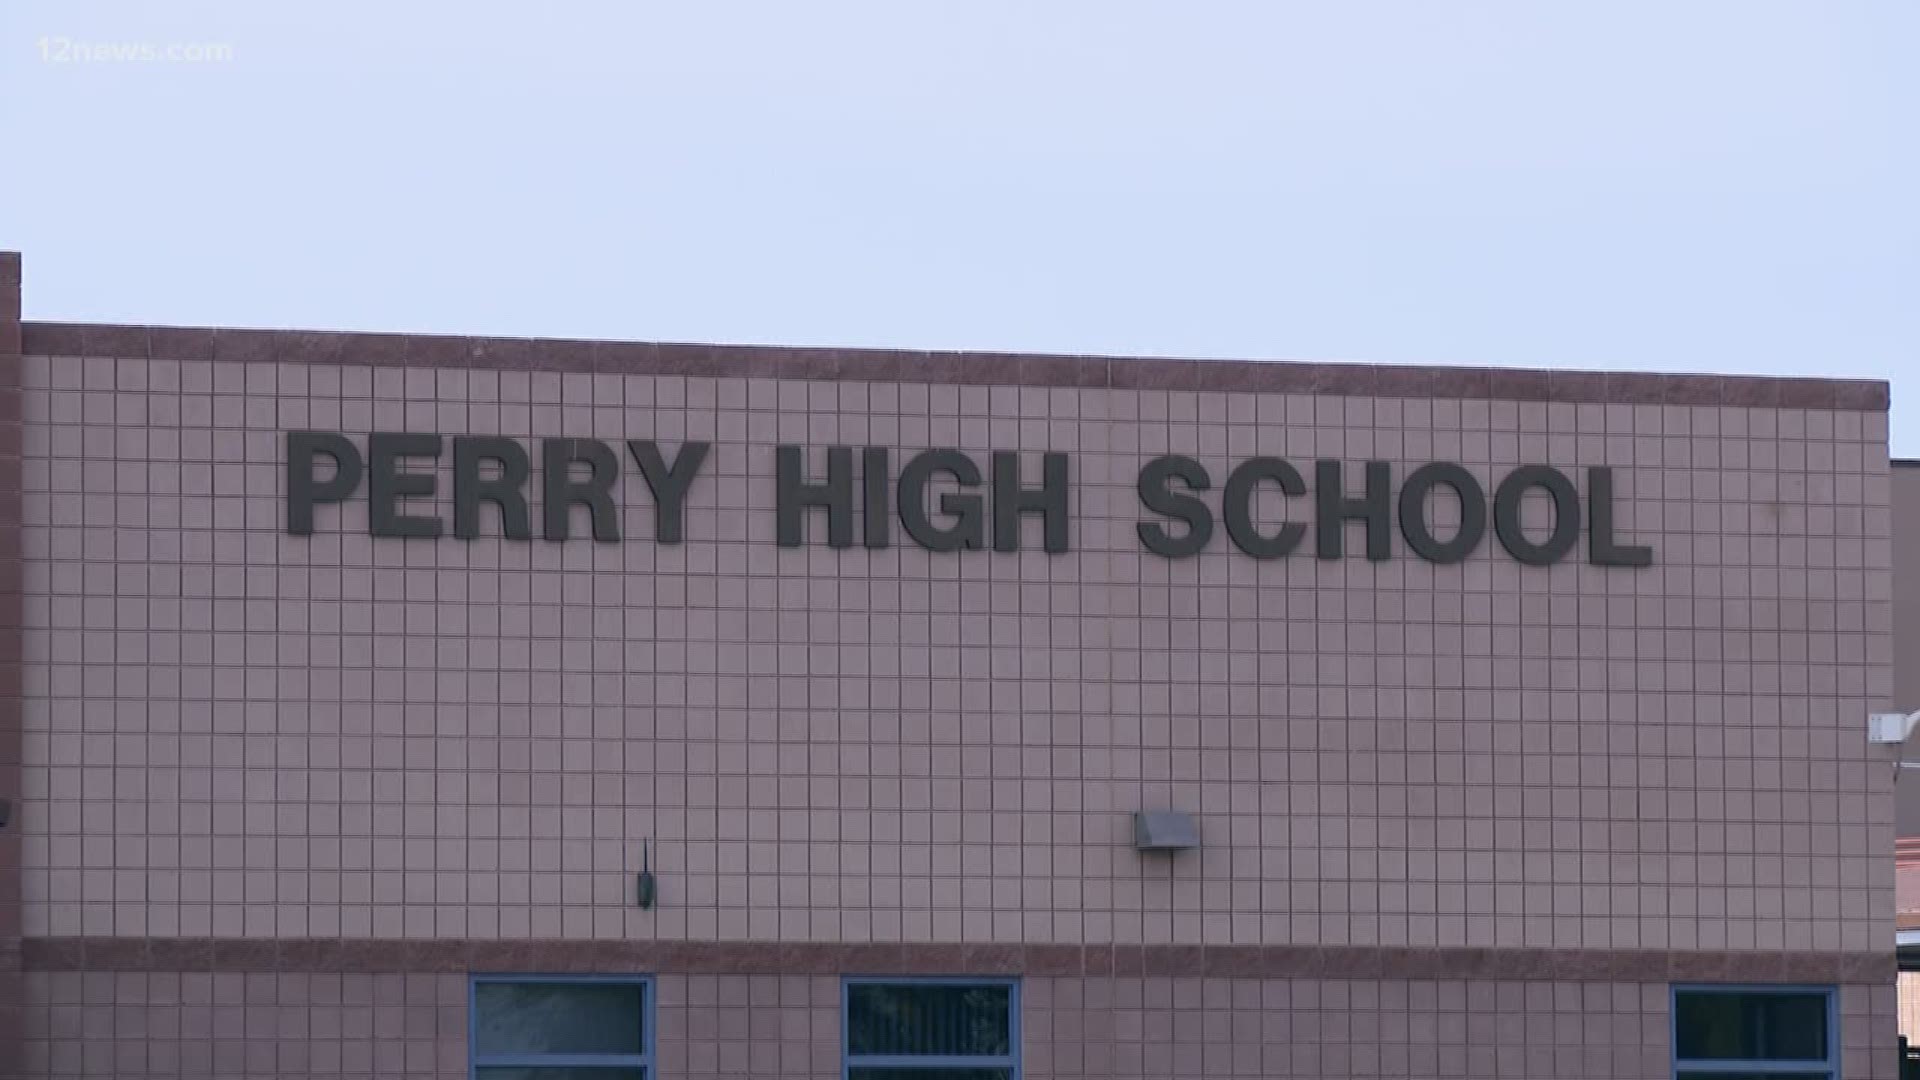 A student who was suspended for 10 days at Perry High School is being allowed to return to school. Earlier this week the student and parents claimed her first amendment rights were violated when a school resource officer asked her and her friends to leave campus while they were walking around with MAGA gear.